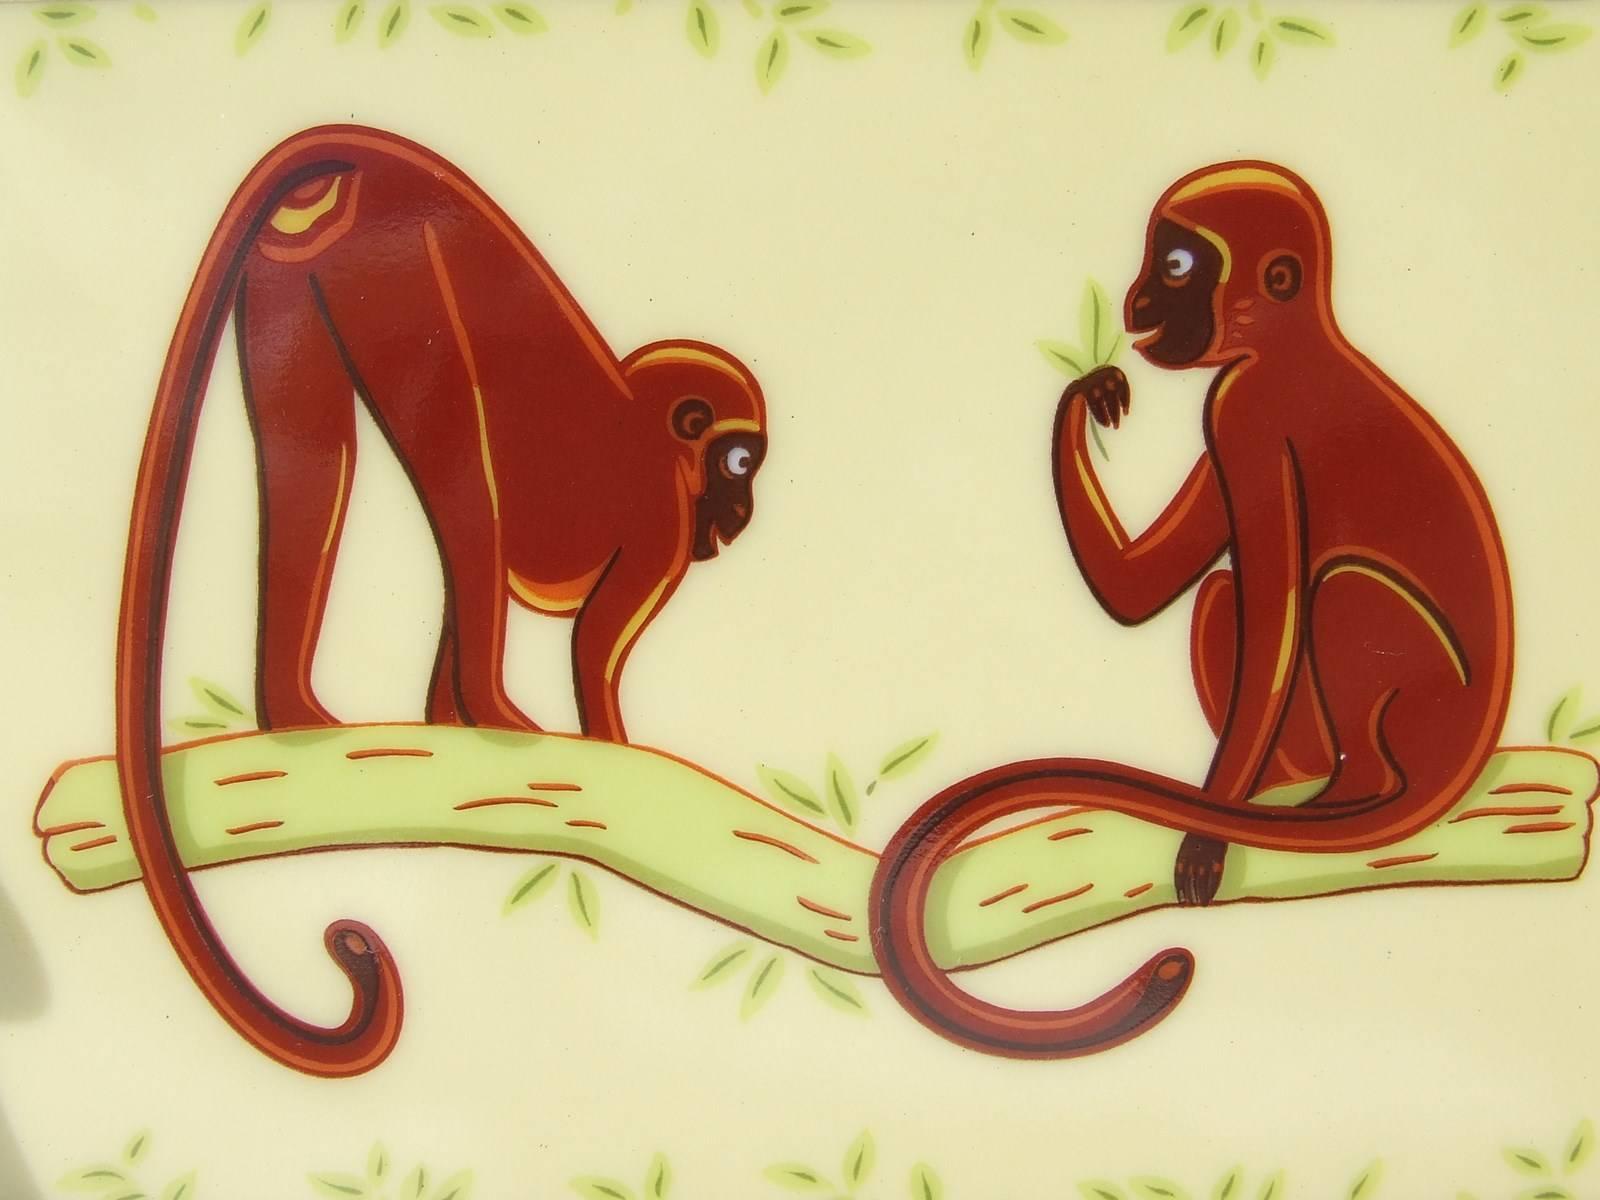 Gorgeous Authentic Hermes Ashtray

Pattern: 2 cute monkeys on a branch in a bamboo decor

Made in France

Made of Printed Limoges Porcelain

Colorways: Pale Yellow Background, Brown Monkeys, Green and Brown bamboo, Golden Border. 

